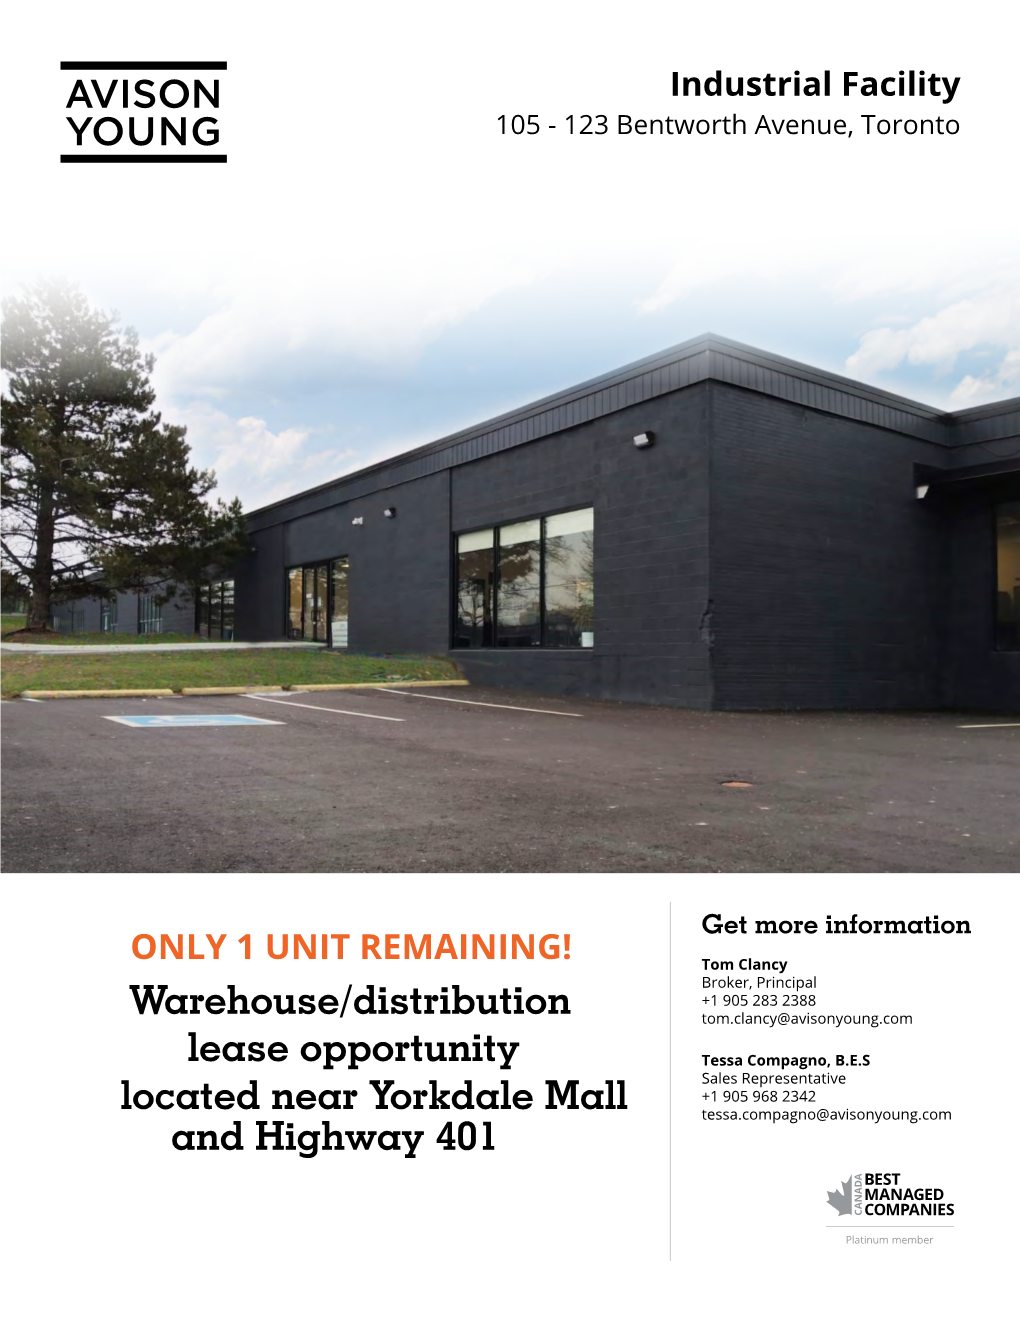 Warehouse/Distribution Lease Opportunity Located Near Yorkdale